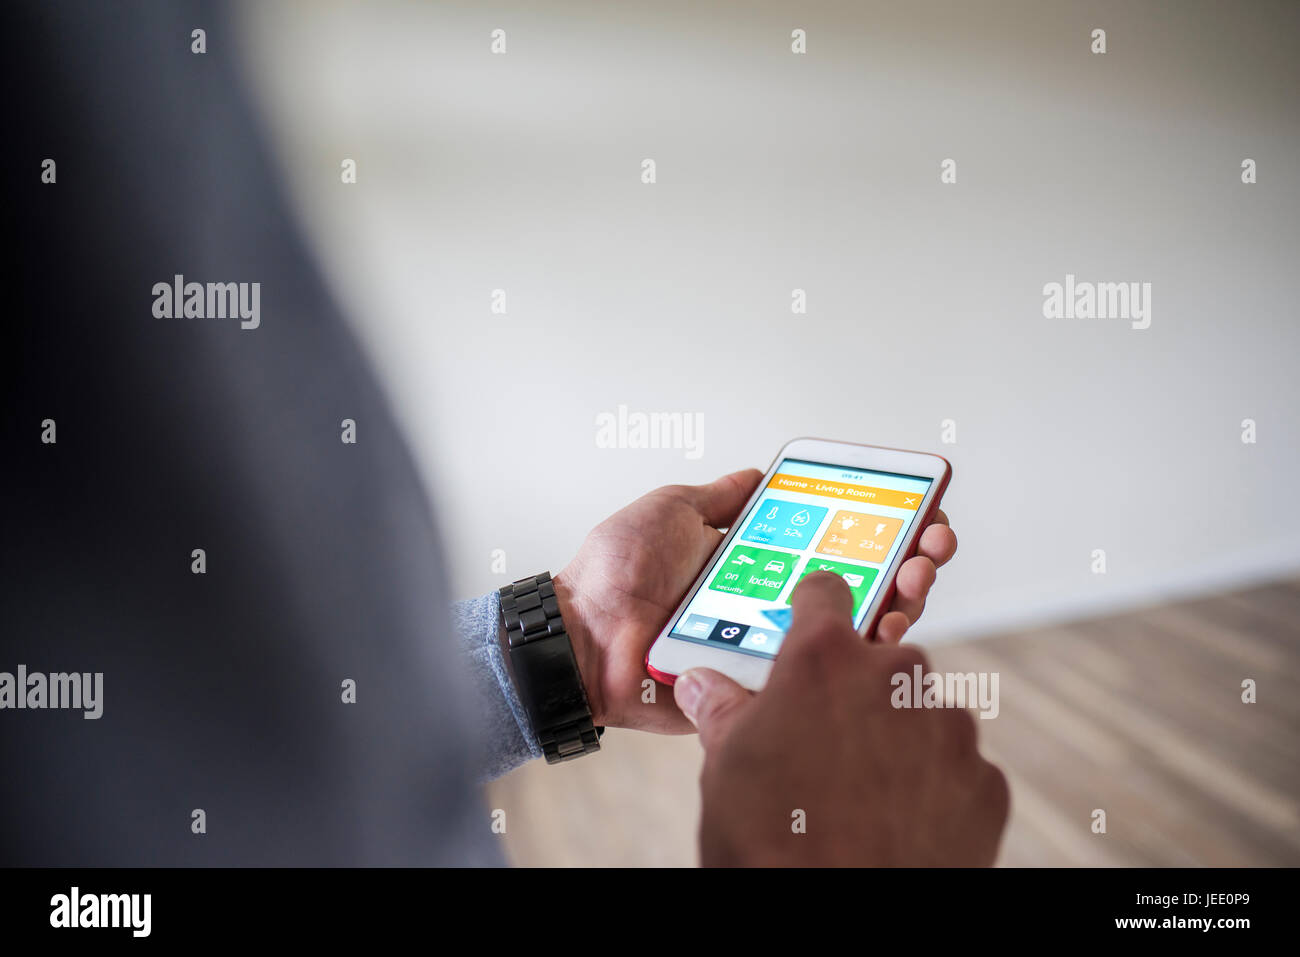 Man at home using smartphone with smart home apps Stock Photo